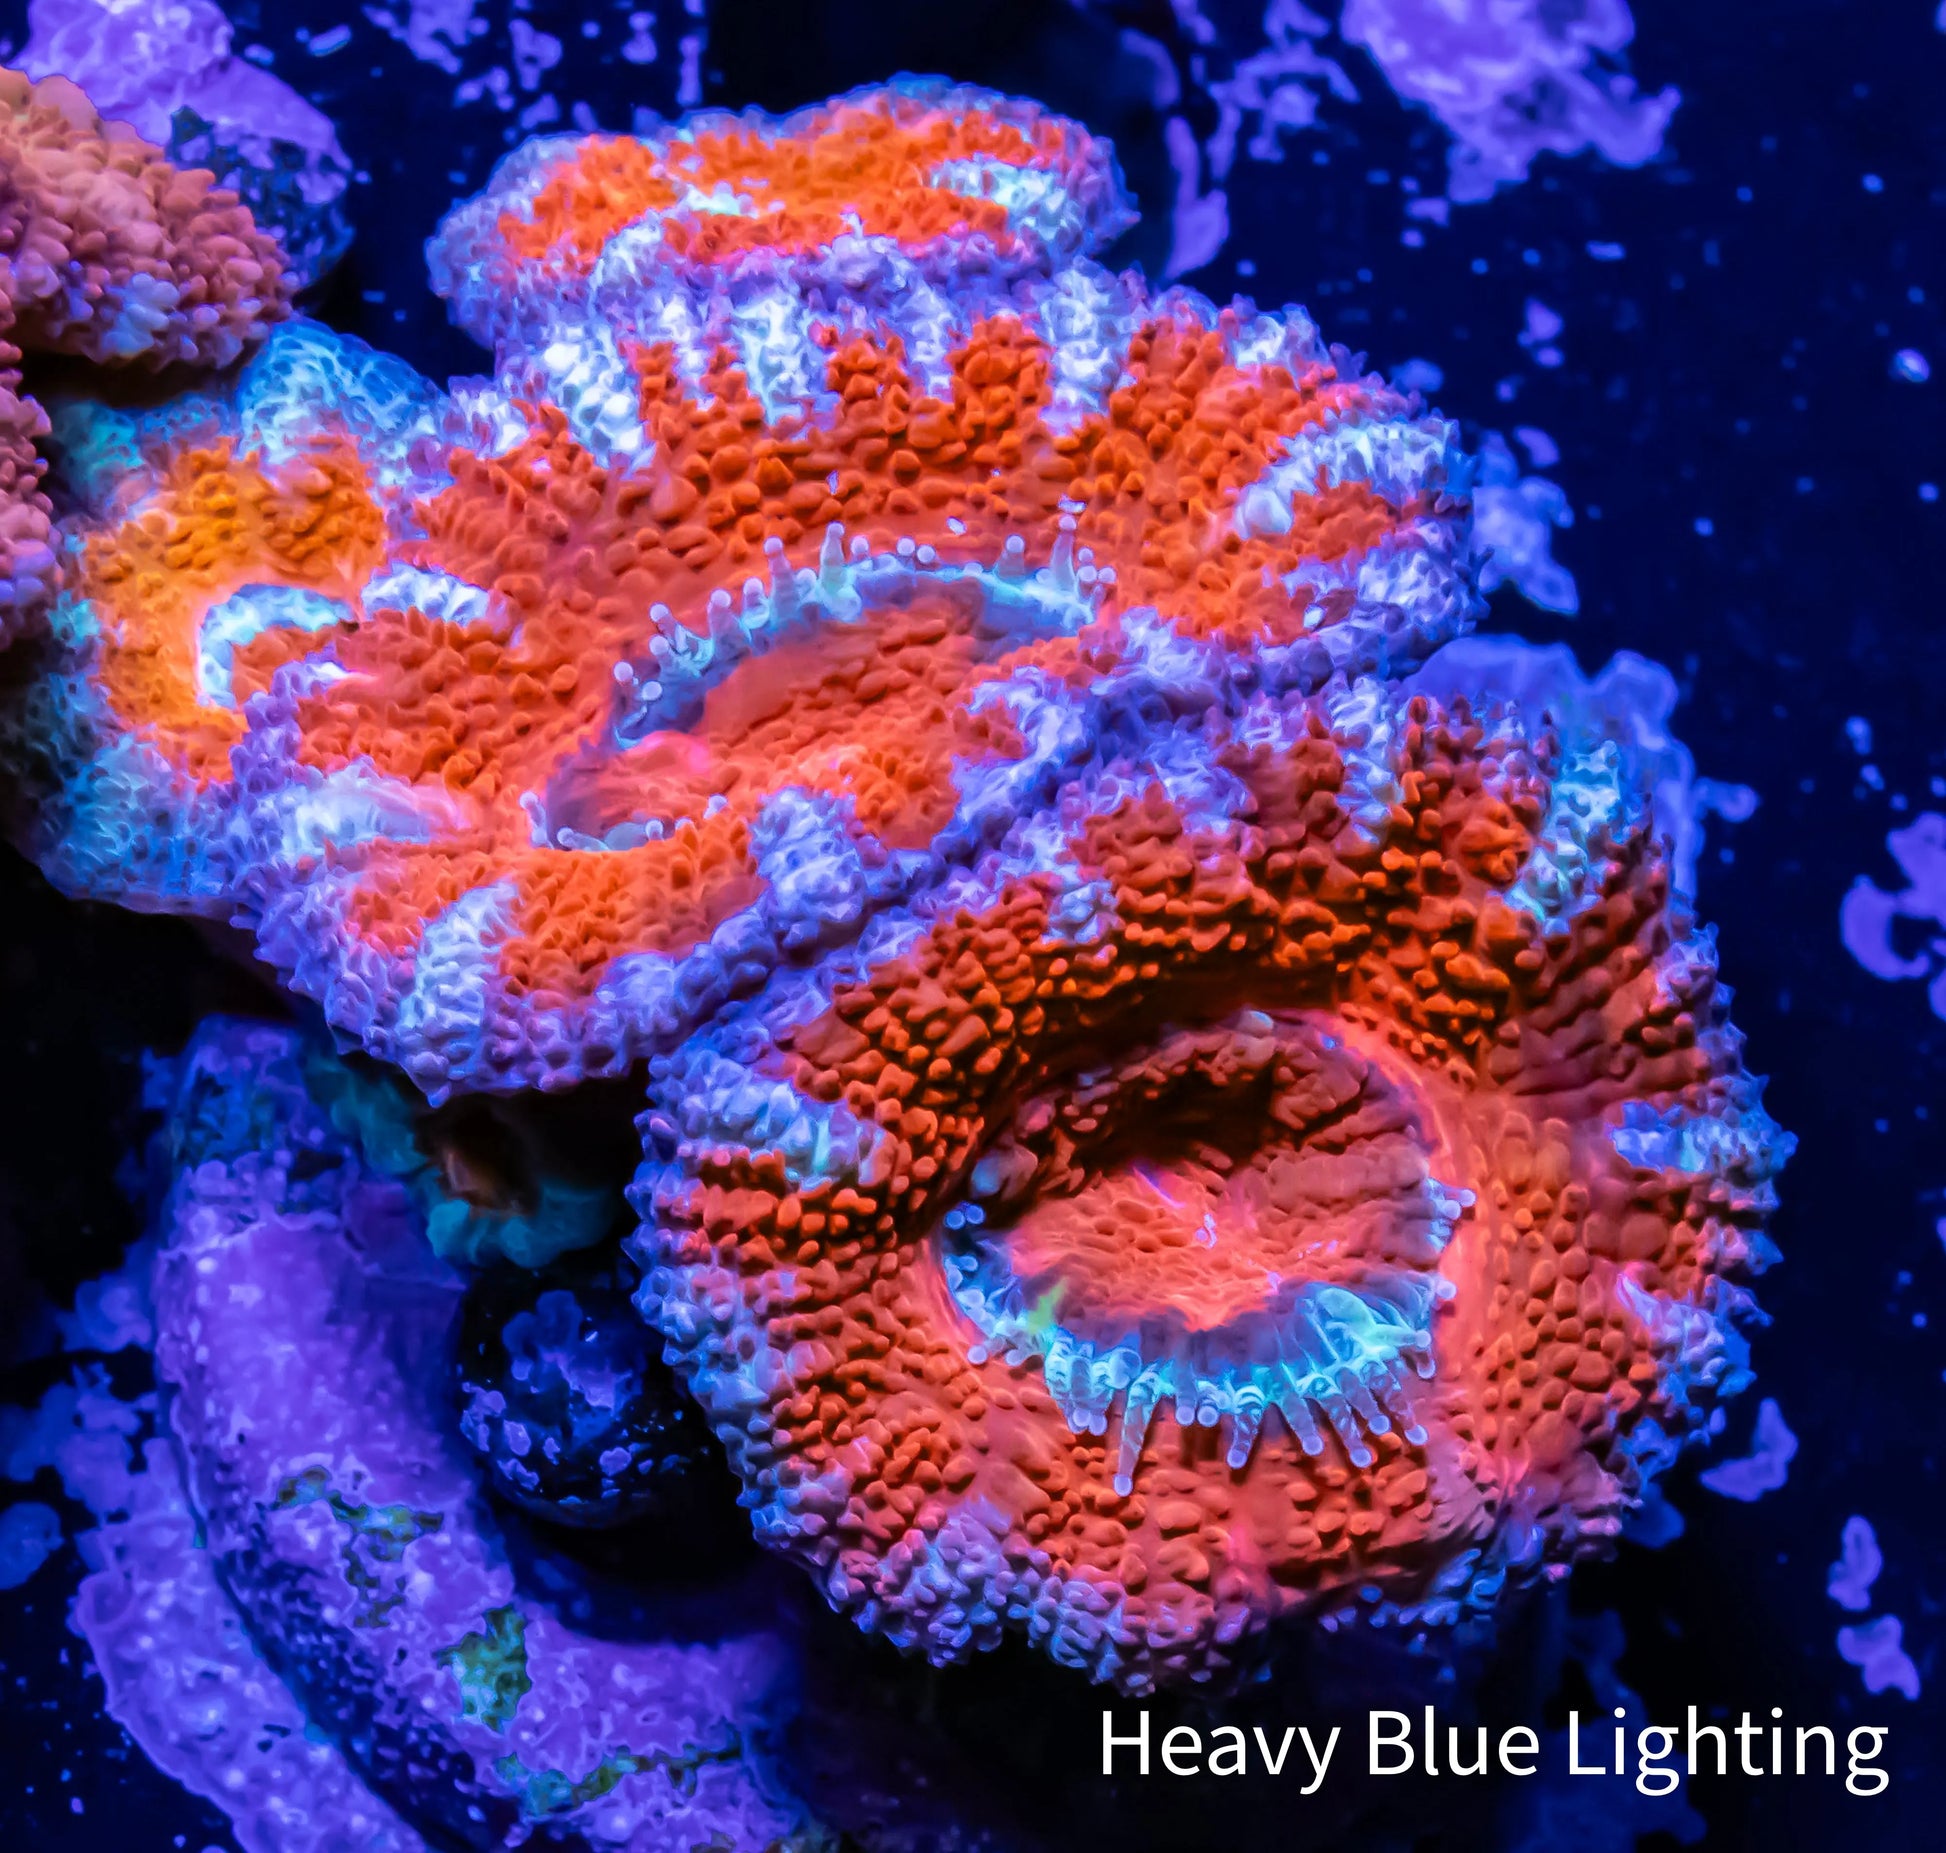 Ultra Acan Coral - Micromussa Lordhowensis - Acan WYSIWYG 3cm Ultra Acan Coral - Micromussa Lordhowensis - Acan WYSIWYG 3cm LPS Coral Ultra Acan Coral - Micromussa Lordhowensis - Acan WYSIWYG 3cm Zeo Box Reef